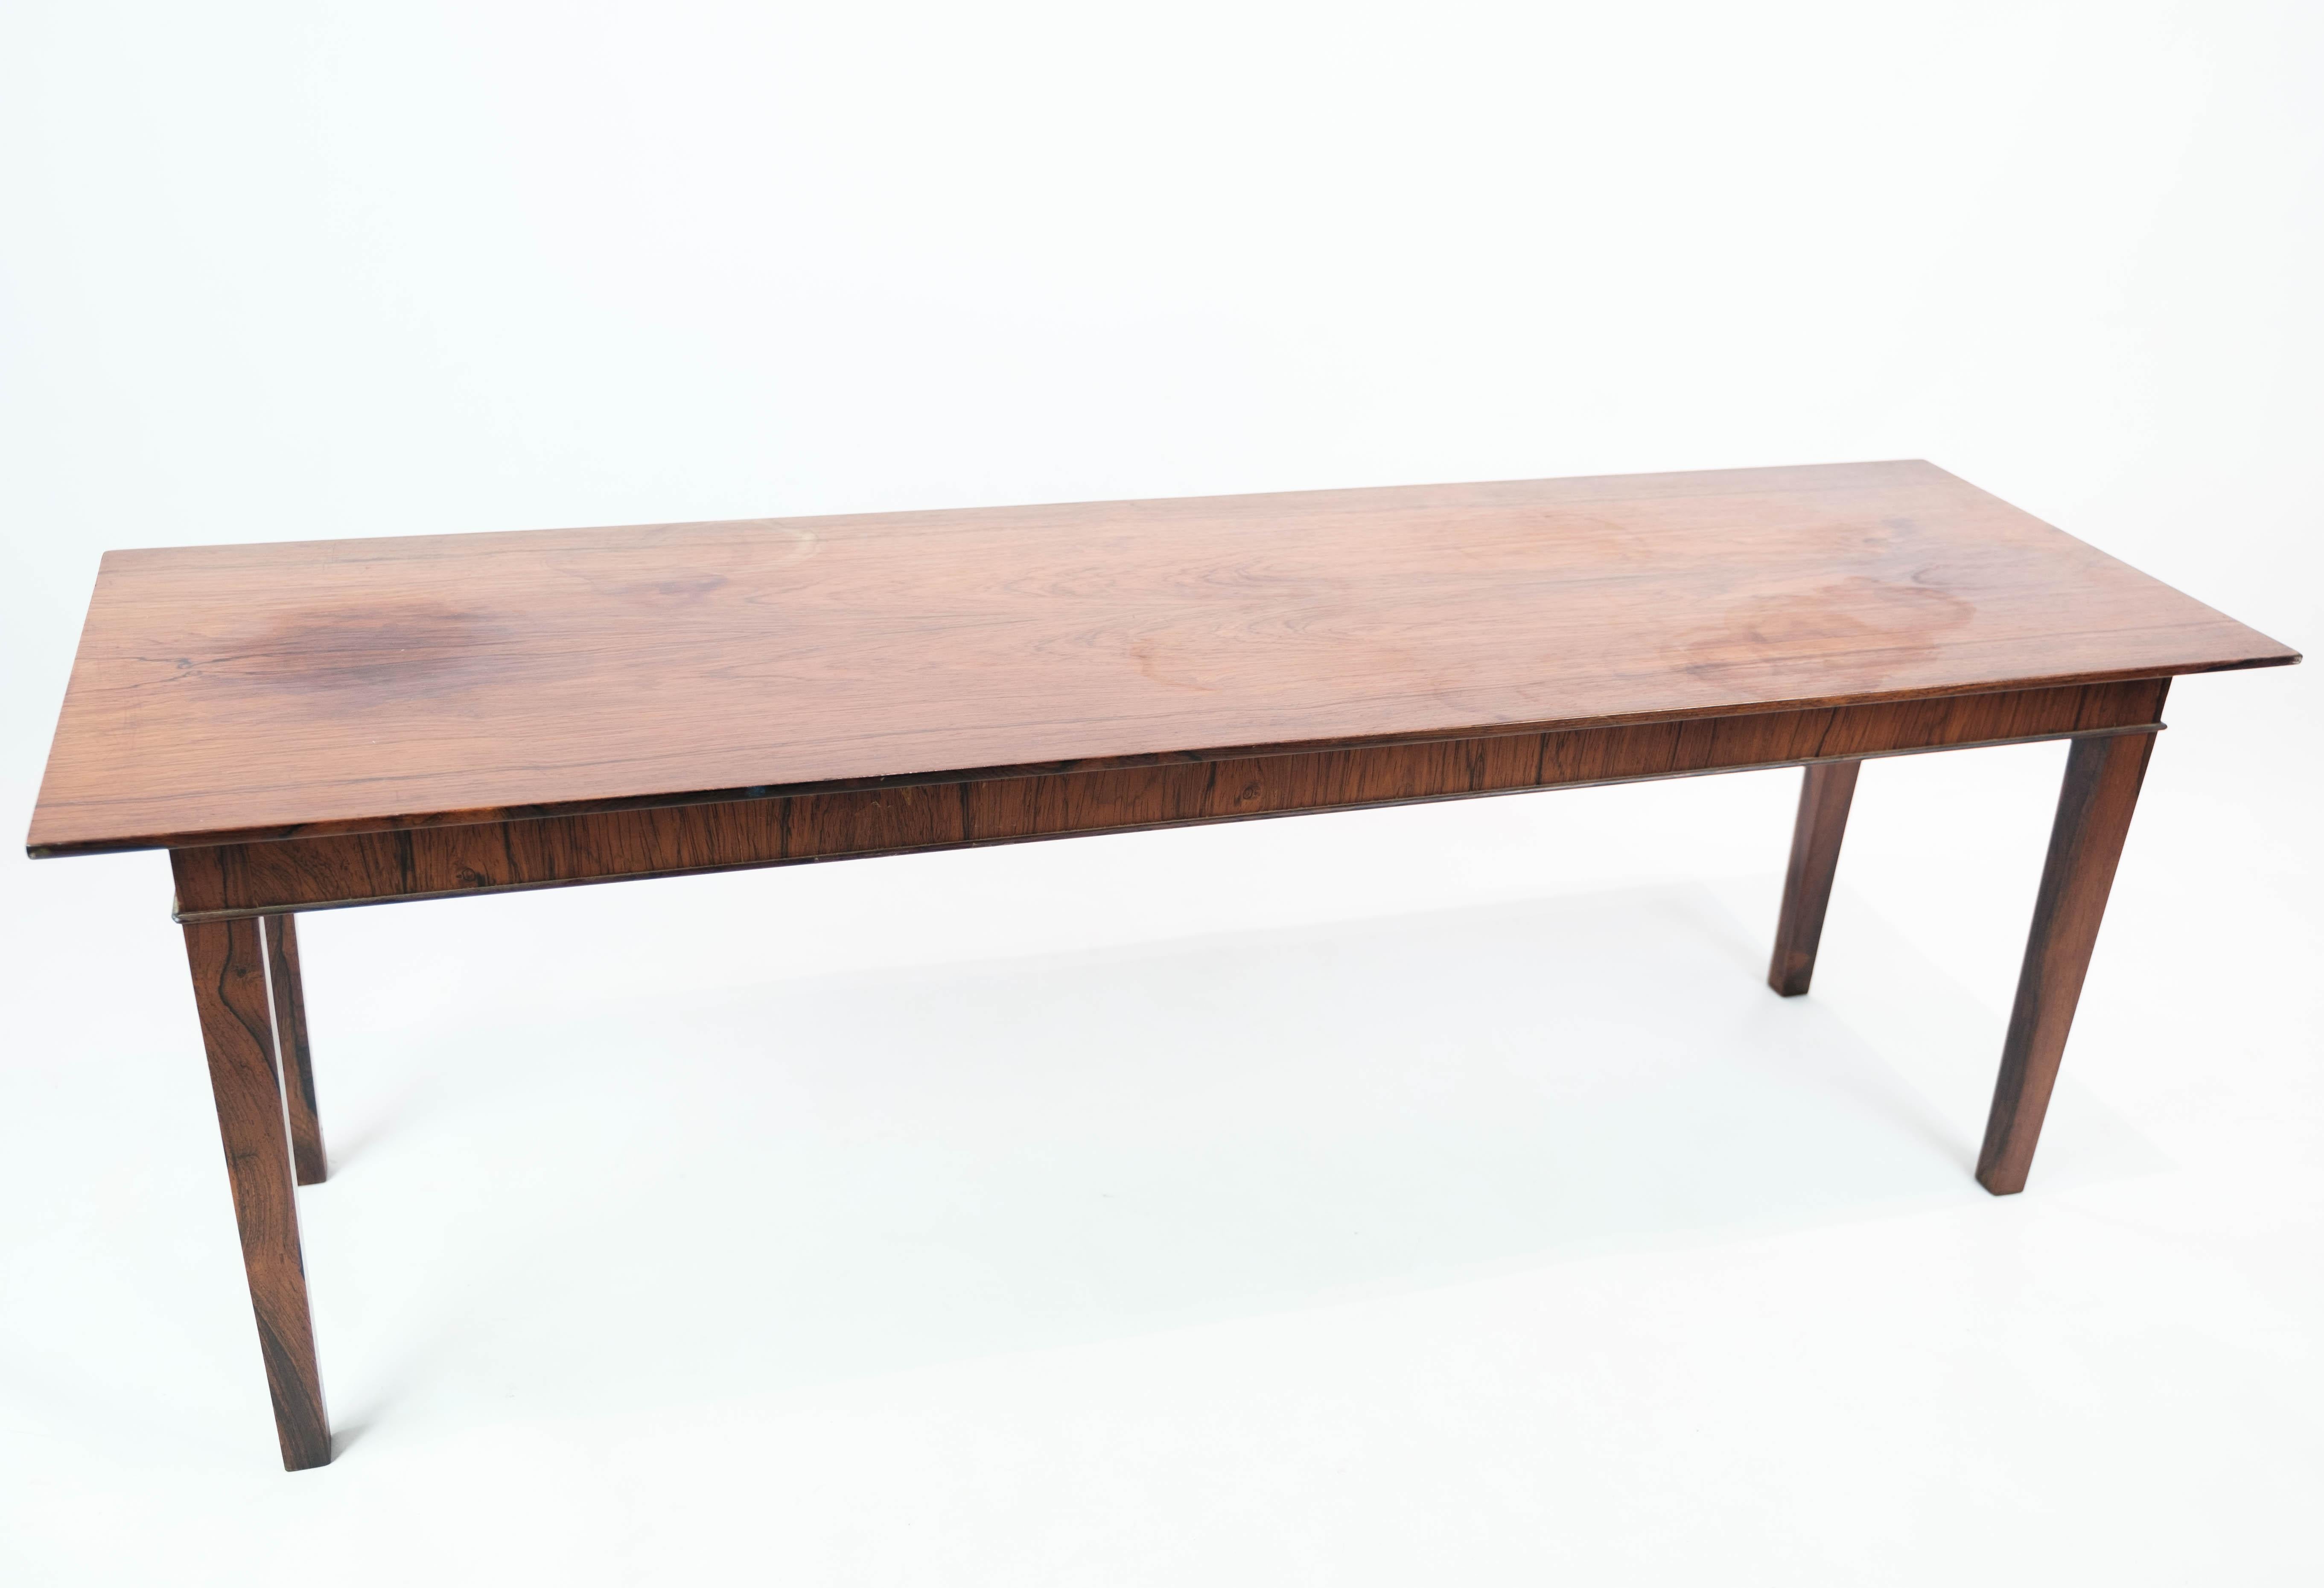 This rosewood coffee table is a beautiful example of Danish design from the 1960s. The table exudes a timeless elegance and is in nice used condition, which reflects its quality and durability.

The deep color and beautiful wood patterns of rosewood